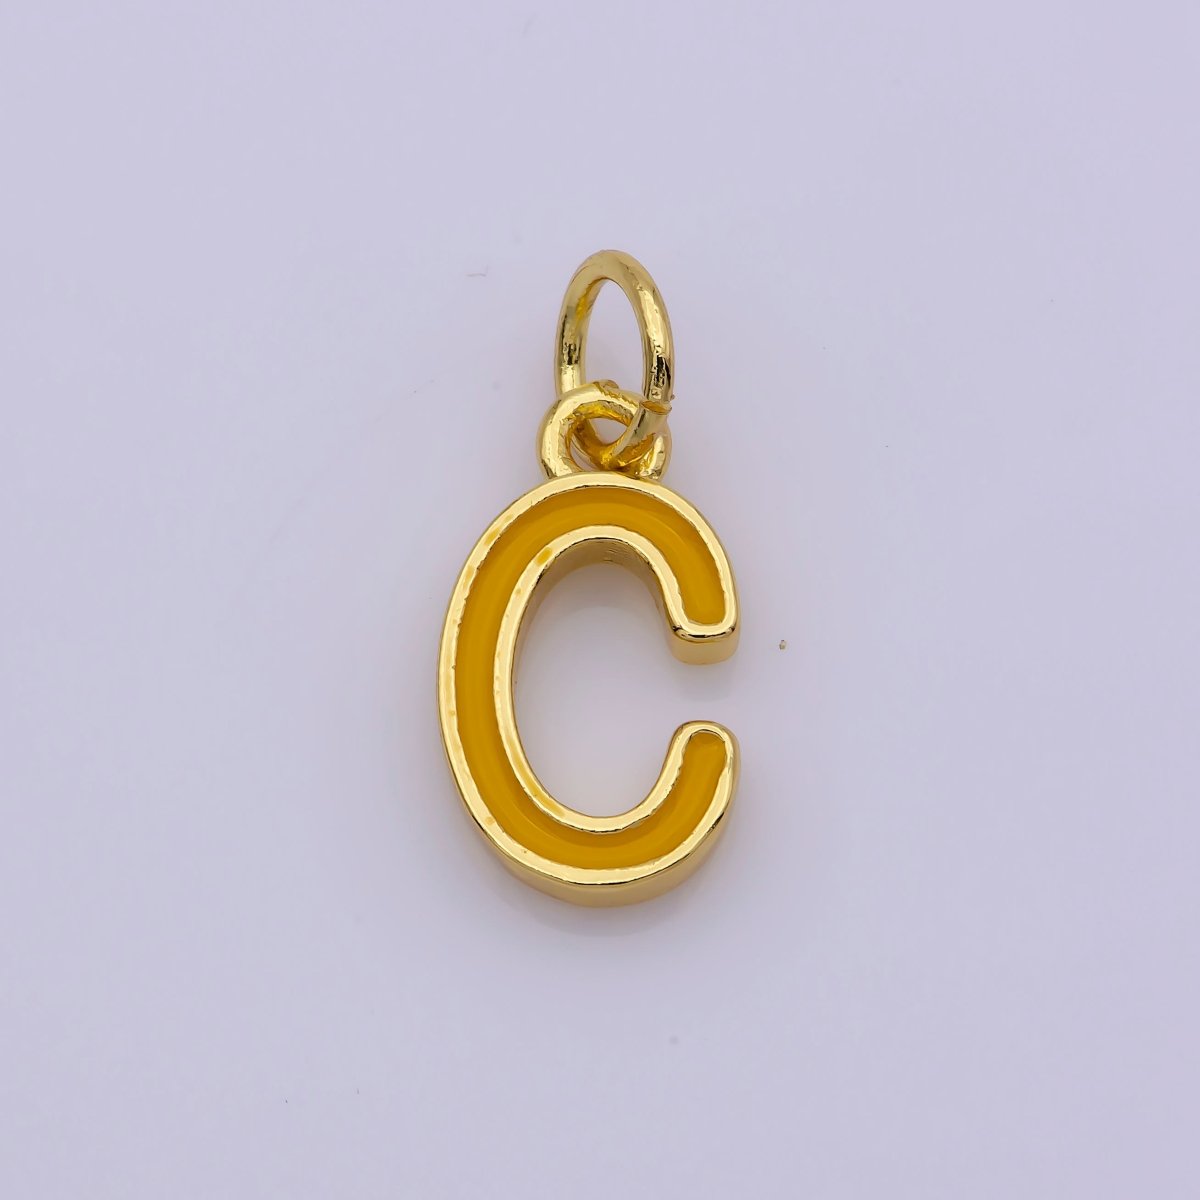 Dainty 14K Gold Filled Letter Charms, Personalized Charm, Initial Charms, Enamel Epoxy Colorful Mini Pendant for Necklace, Bracelet, Earring A-836 to A-848 - DLUXCA